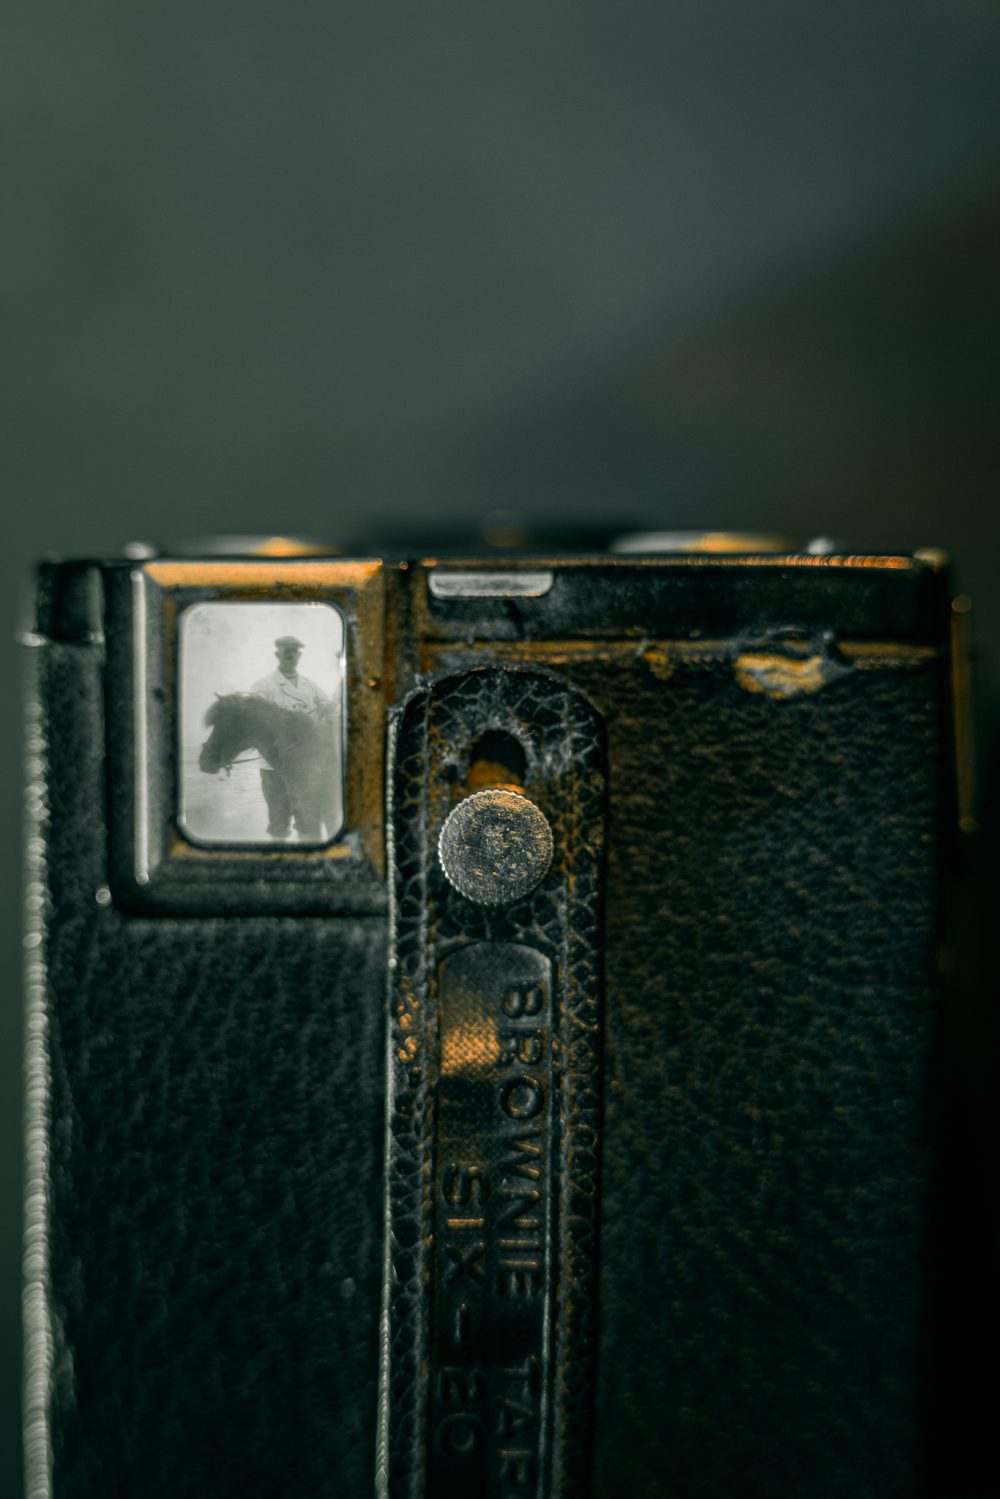 Color photo looking through the viewfinder of a Kodak Brownie at an old black and white photograph of a man standing behind a horse.